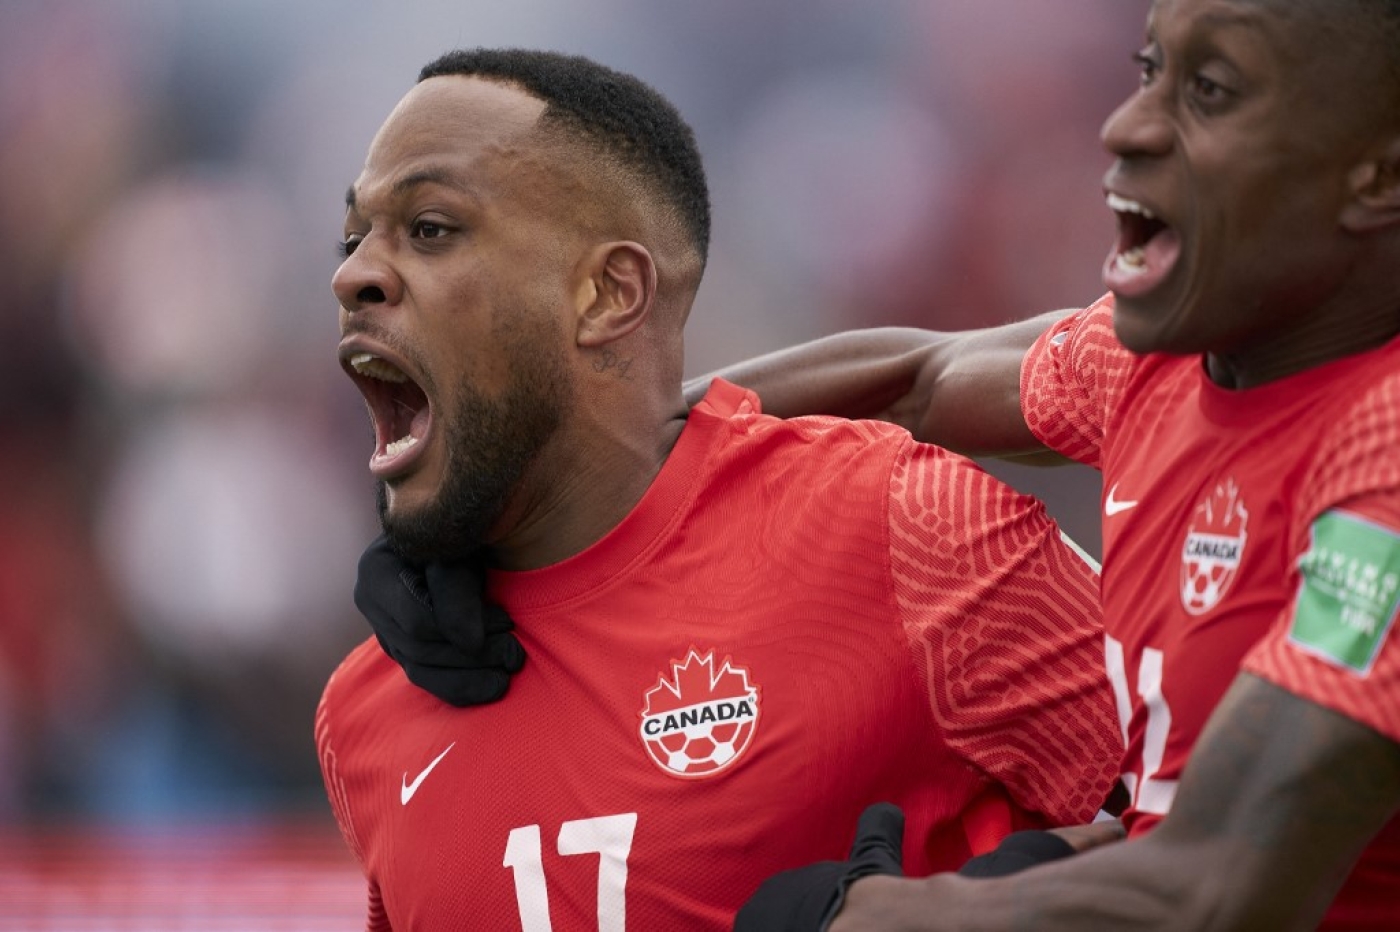 Canada’s Cyle Larin celebrates his goal with teammate Richie Laryea during their World Cup Qualifying match against Jamaica at BMO Field in Toronto on 27 March 2022. (AFP)